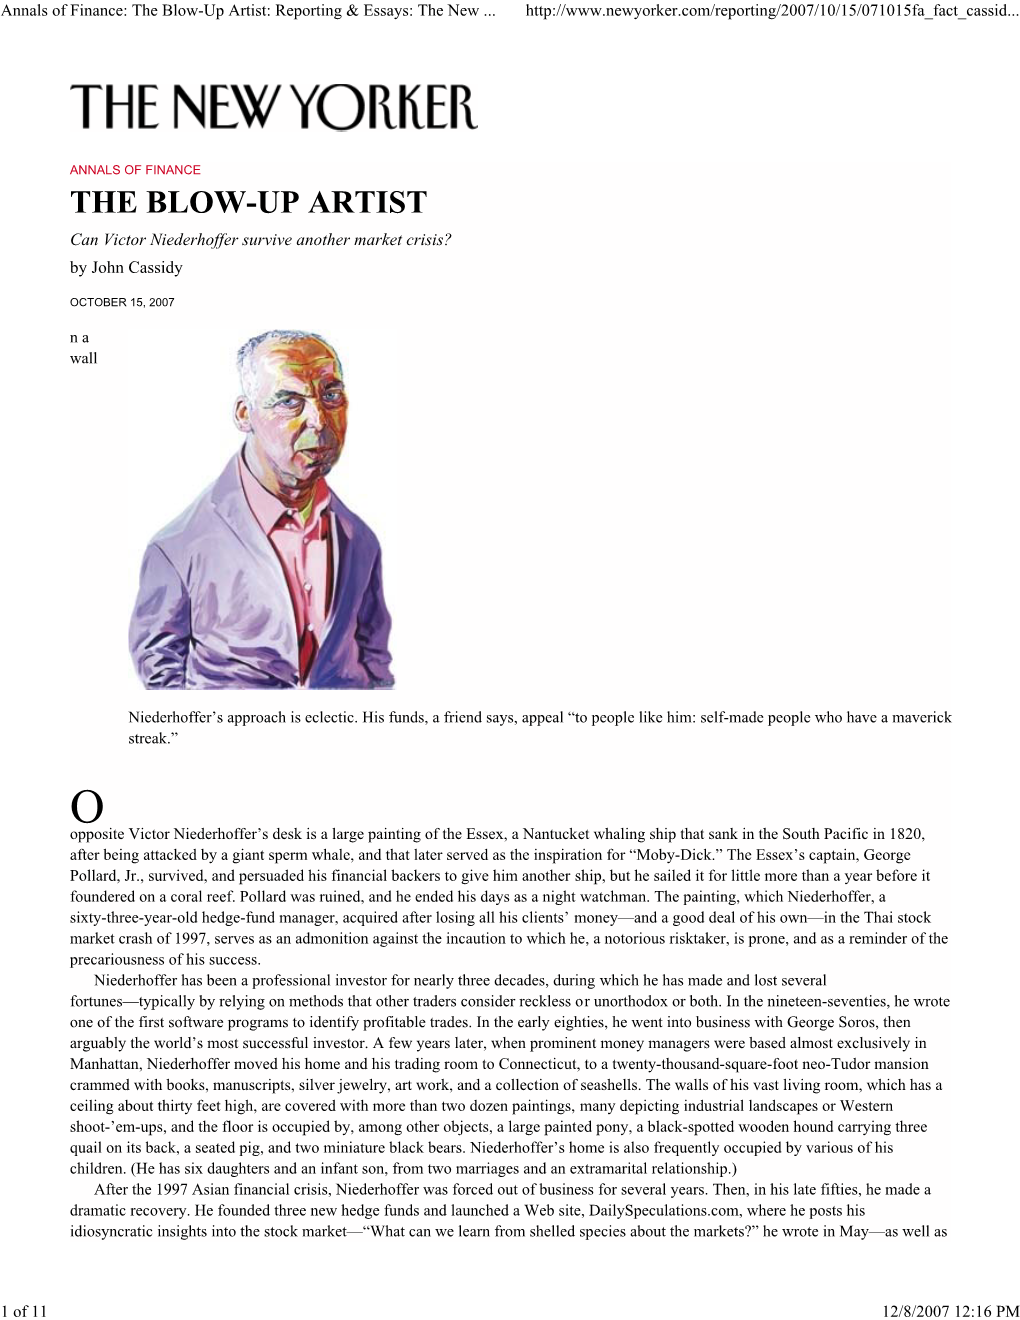 The Blow-Up Artist: Reporting & Essays: the New